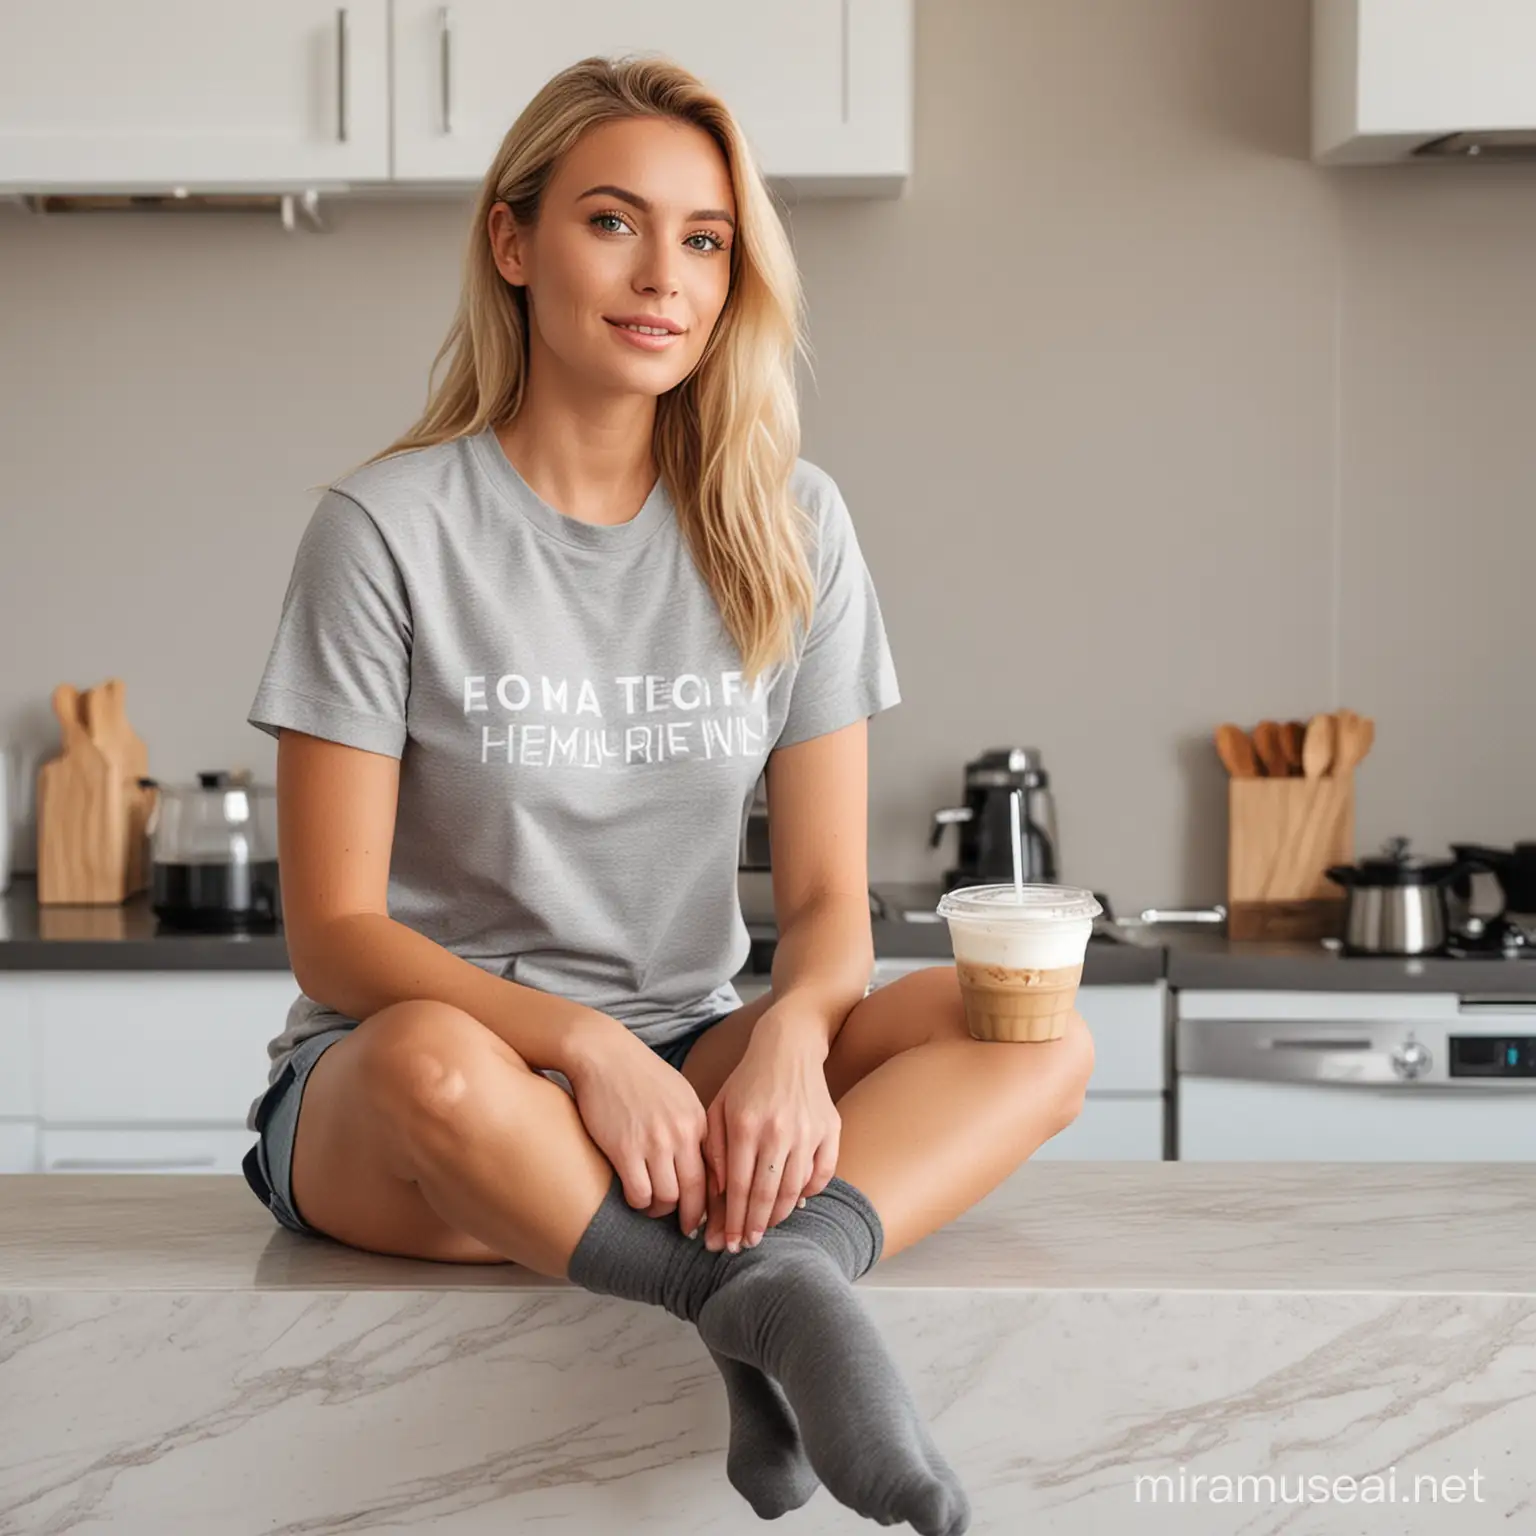 blonde woman wearing  grey t-shirt mockup holding a ice coffee, sitting on top of kitchen counter top, wearing socks